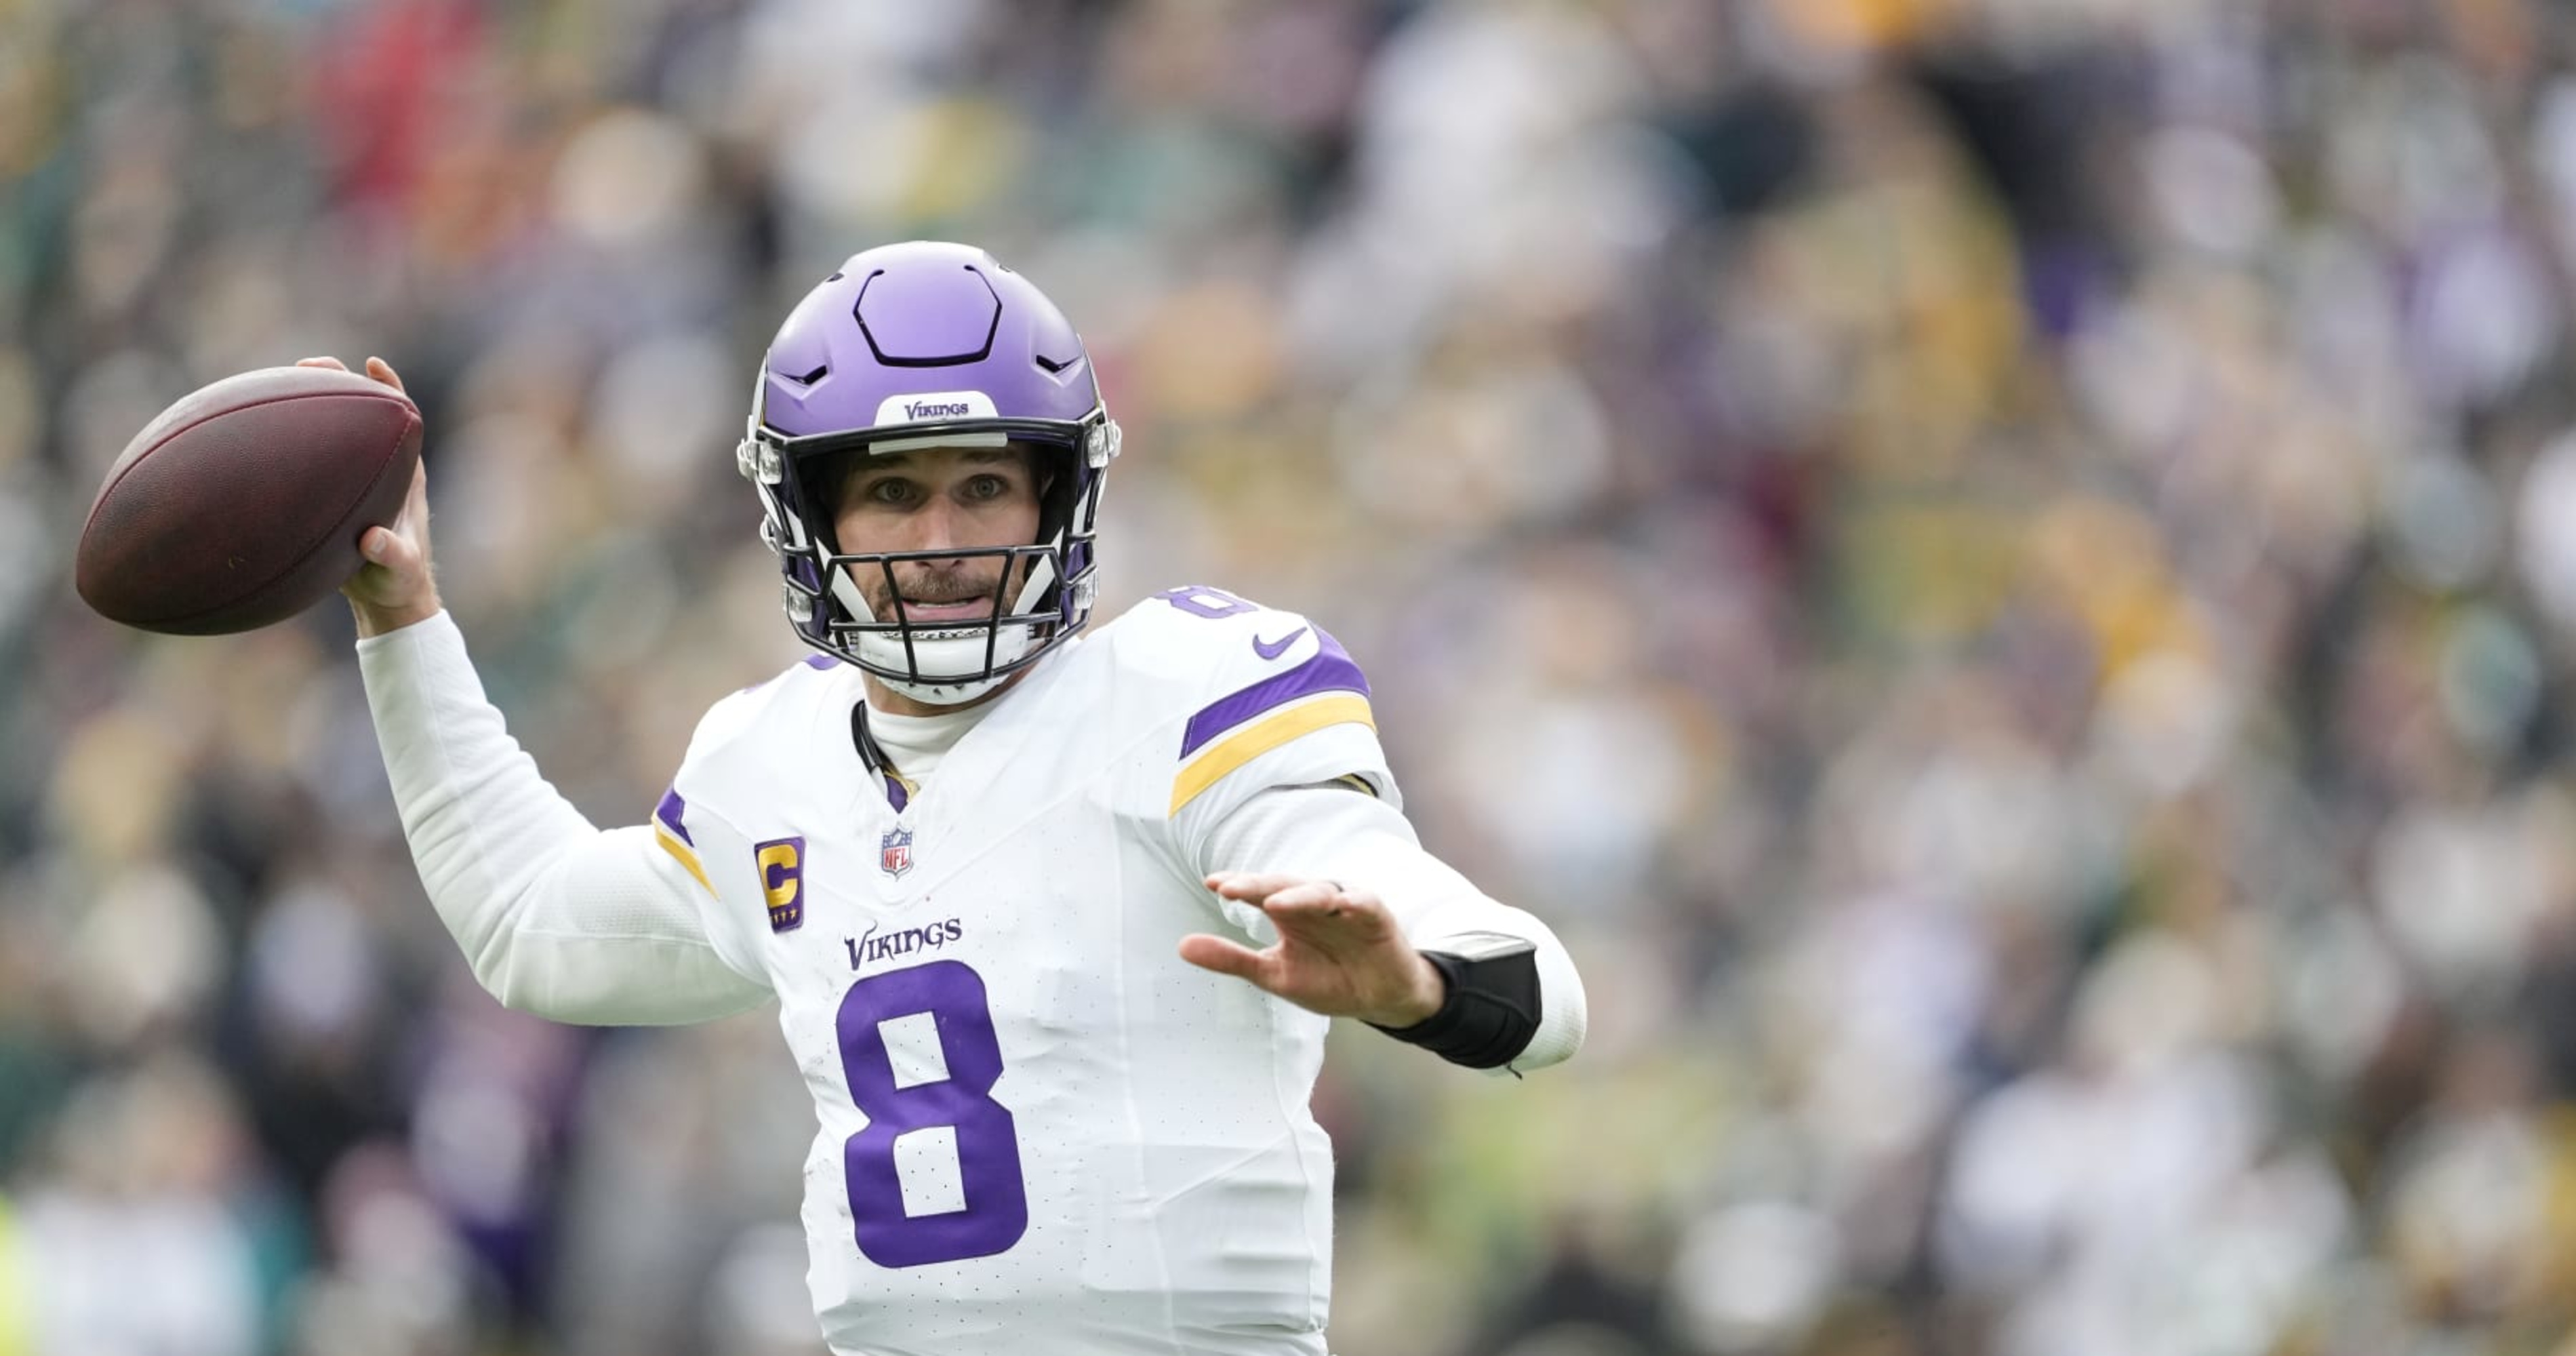 Vikings' Kirk Cousins Posts Photo After Achilles Injury Surgery: 'One Day at a Time'